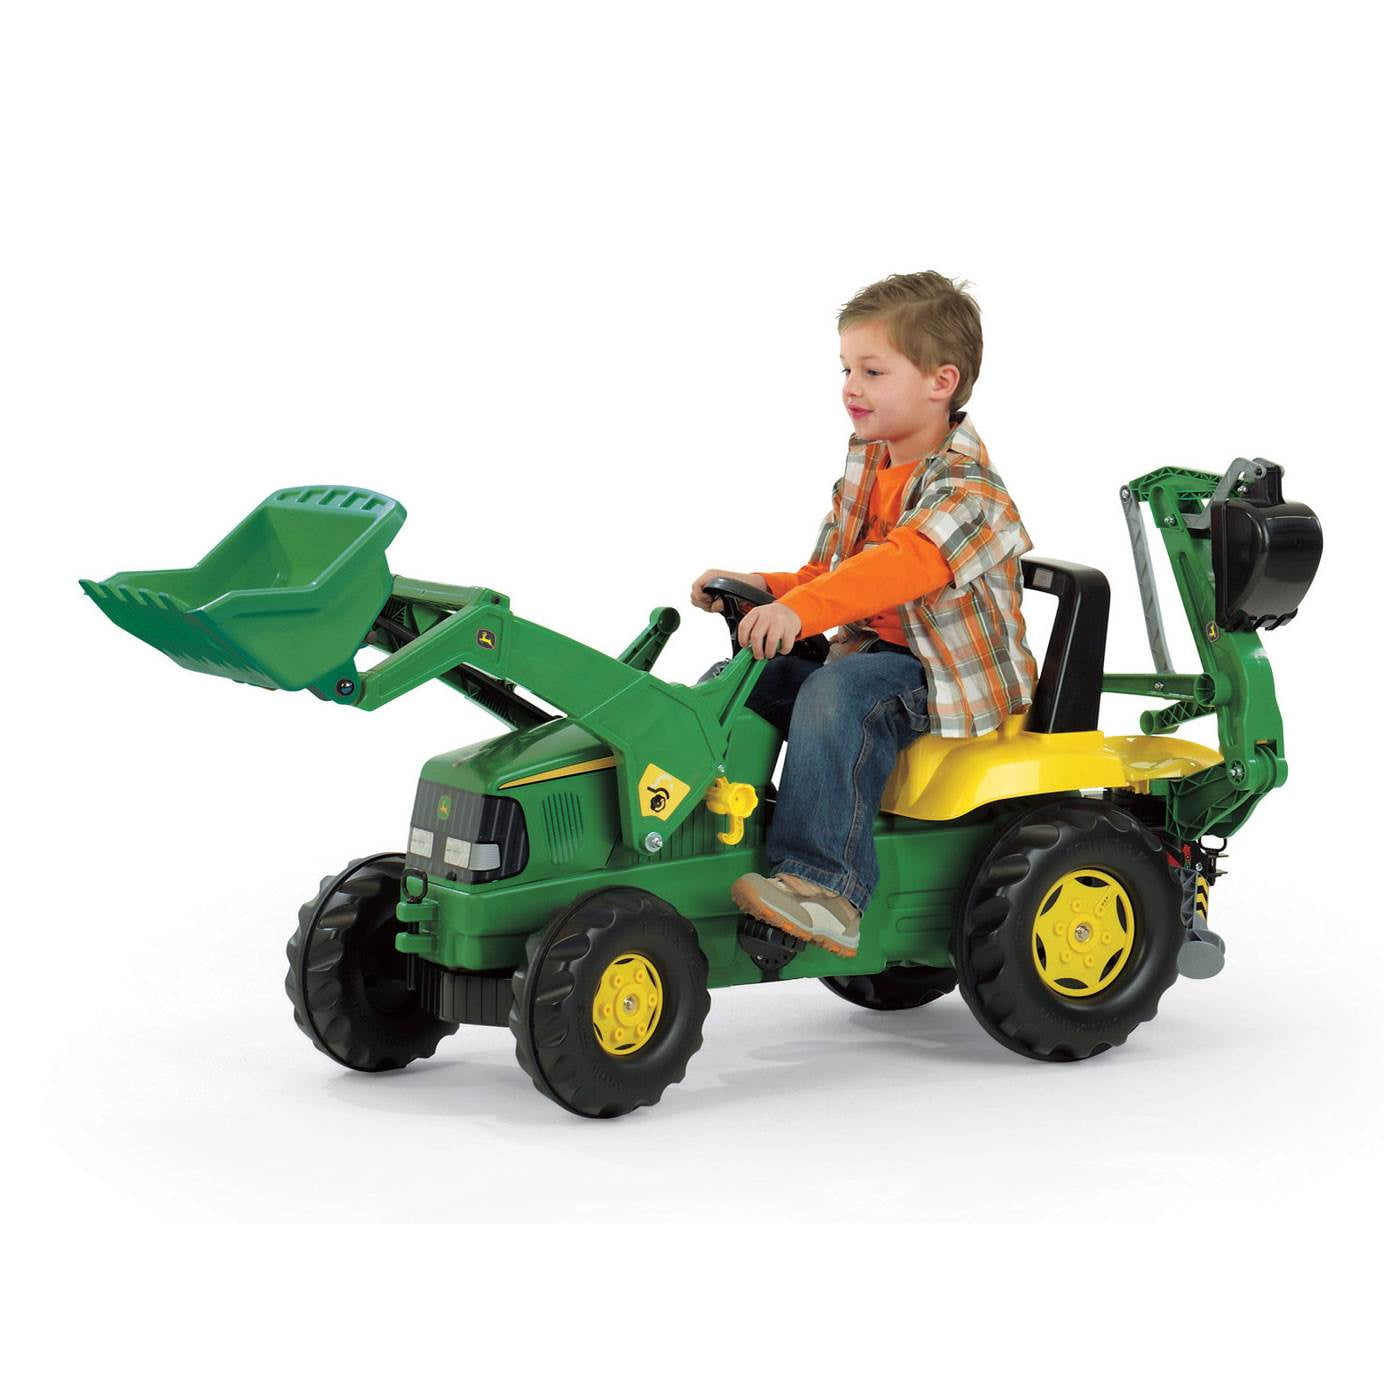 Rolly Toys John Deere Ride on Pedal Tractor with Loader & Trailer Age 2 1/2 